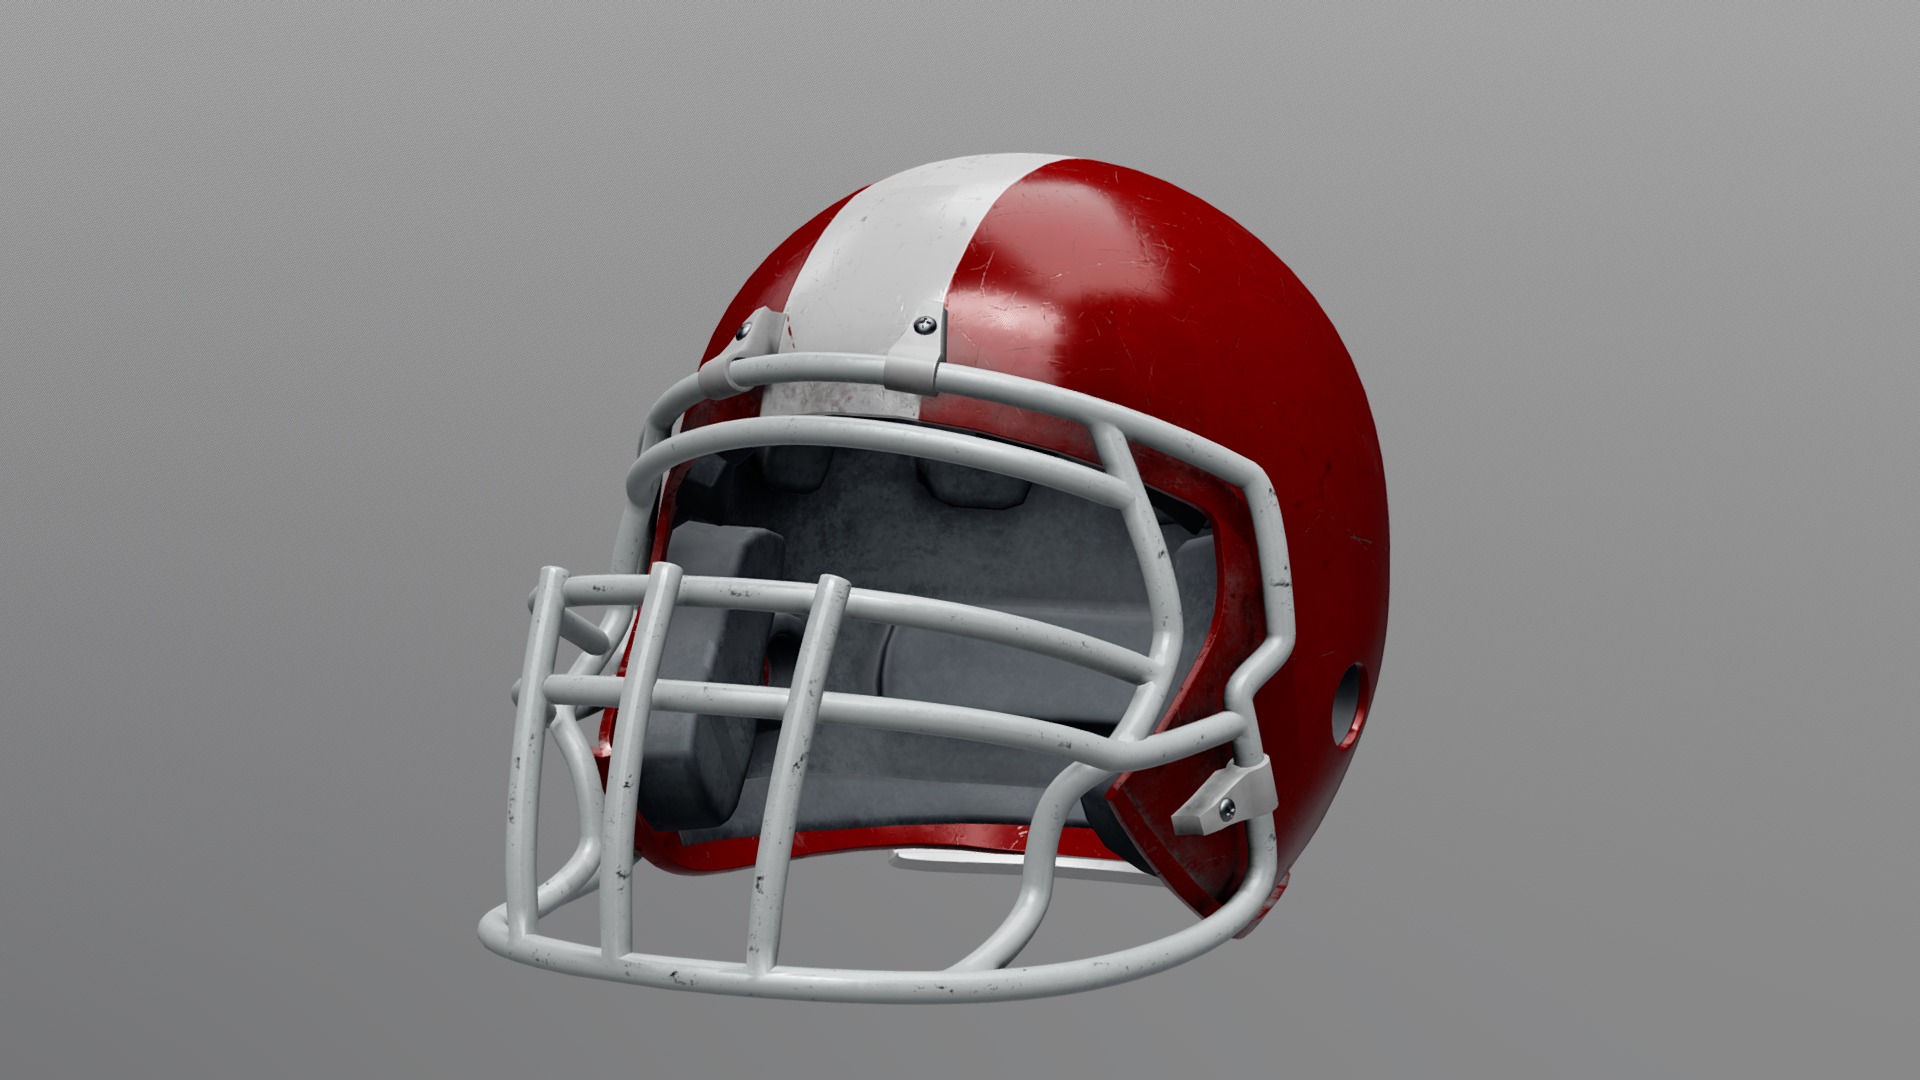 3D model Old and Used American Football Helmet - This is a 3D model of the Old and Used American Football Helmet. The 3D model is about a red and white basketball.